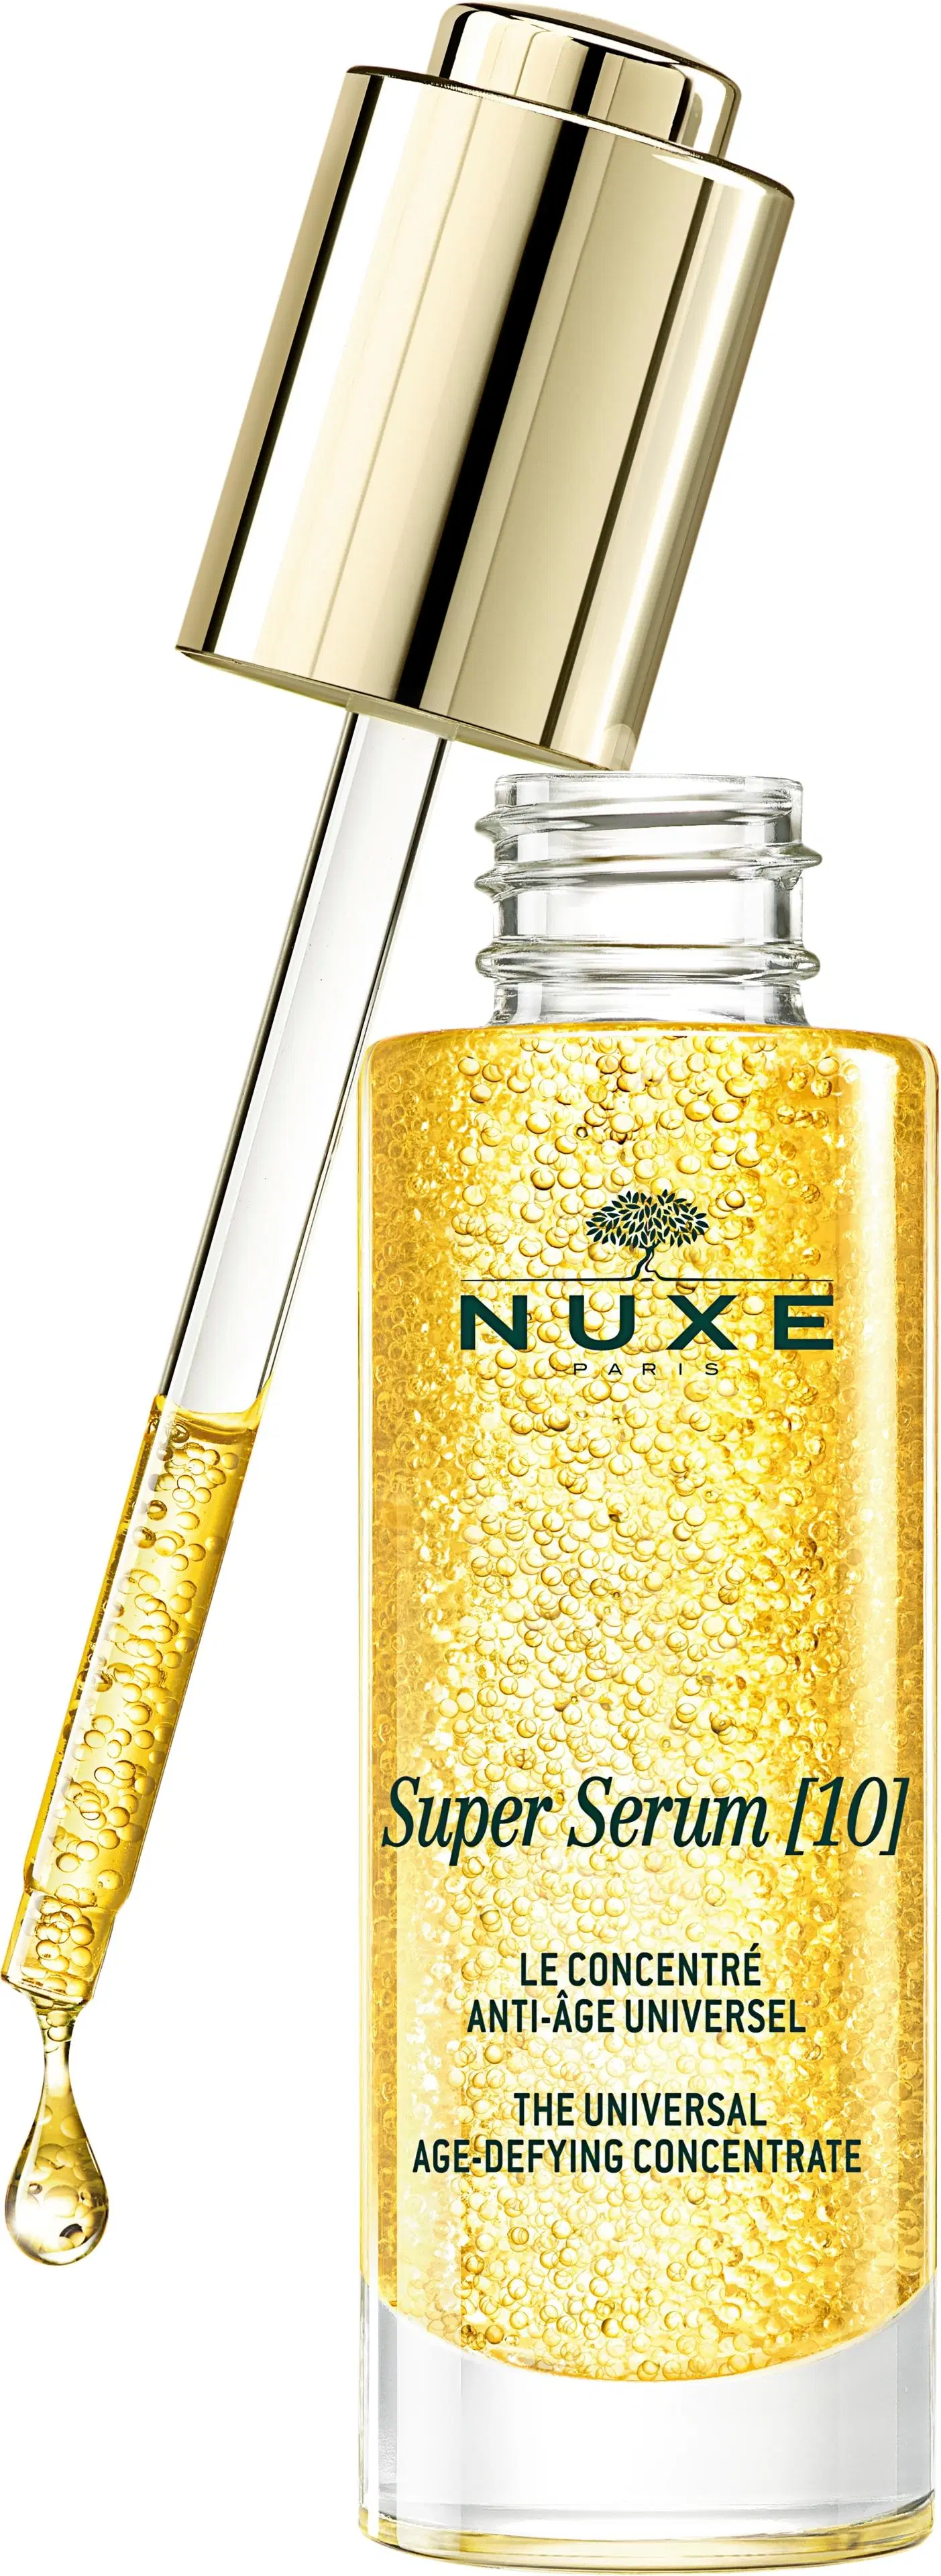 NUXE Super Serum [10] The Universal Age-Defying Concentrate kasvoseerumi 30 ml